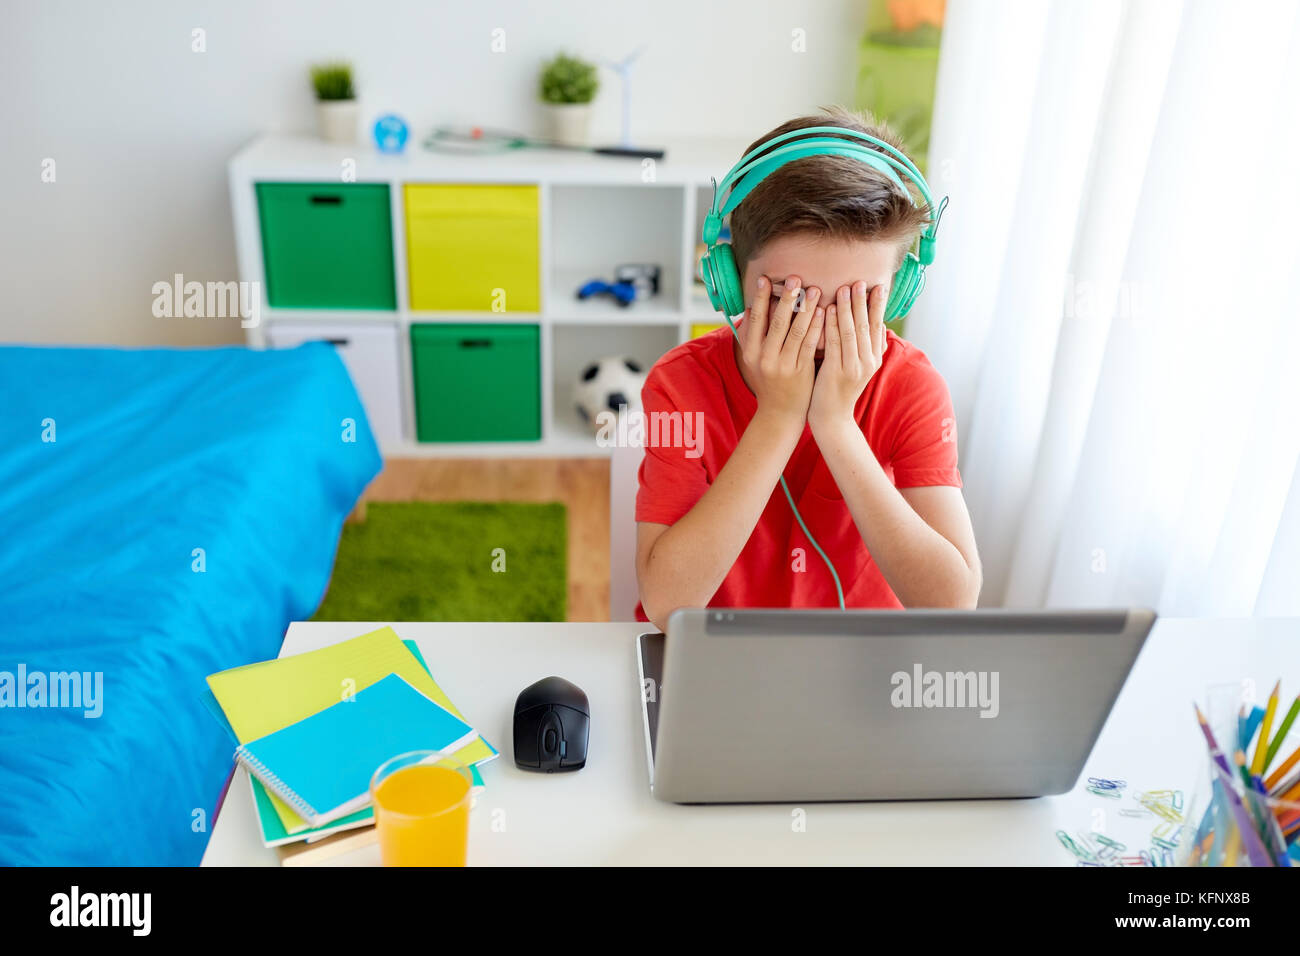 Boy in headphones playing video game on laptop Banque D'Images